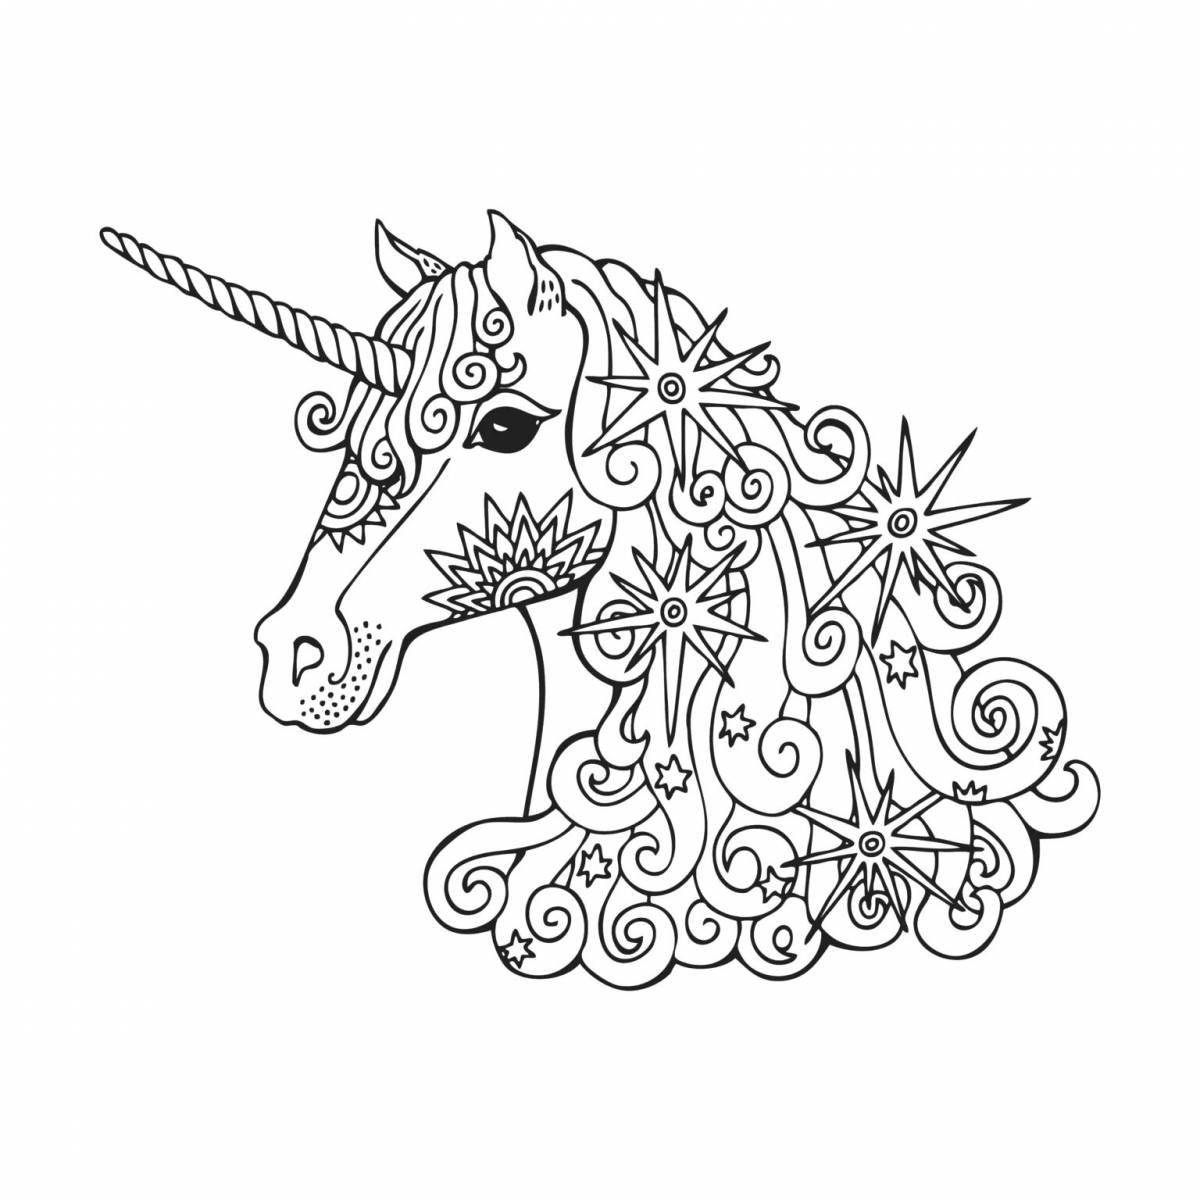 Blissful coloring unicorn antistress for kids